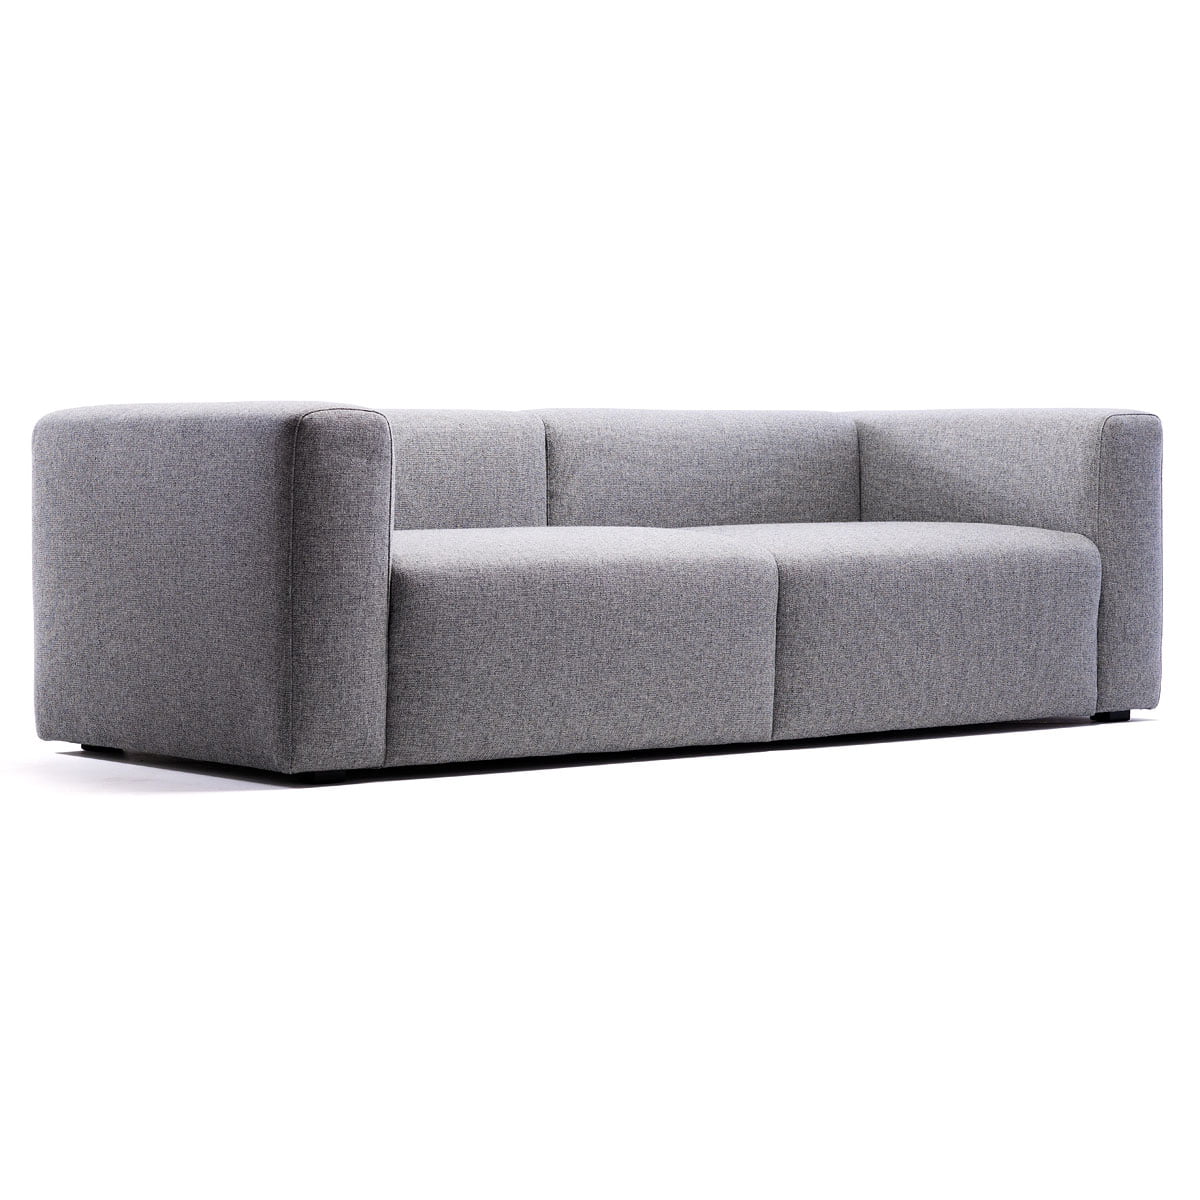 Mags Sofa 2 5 Seater Hay Shop